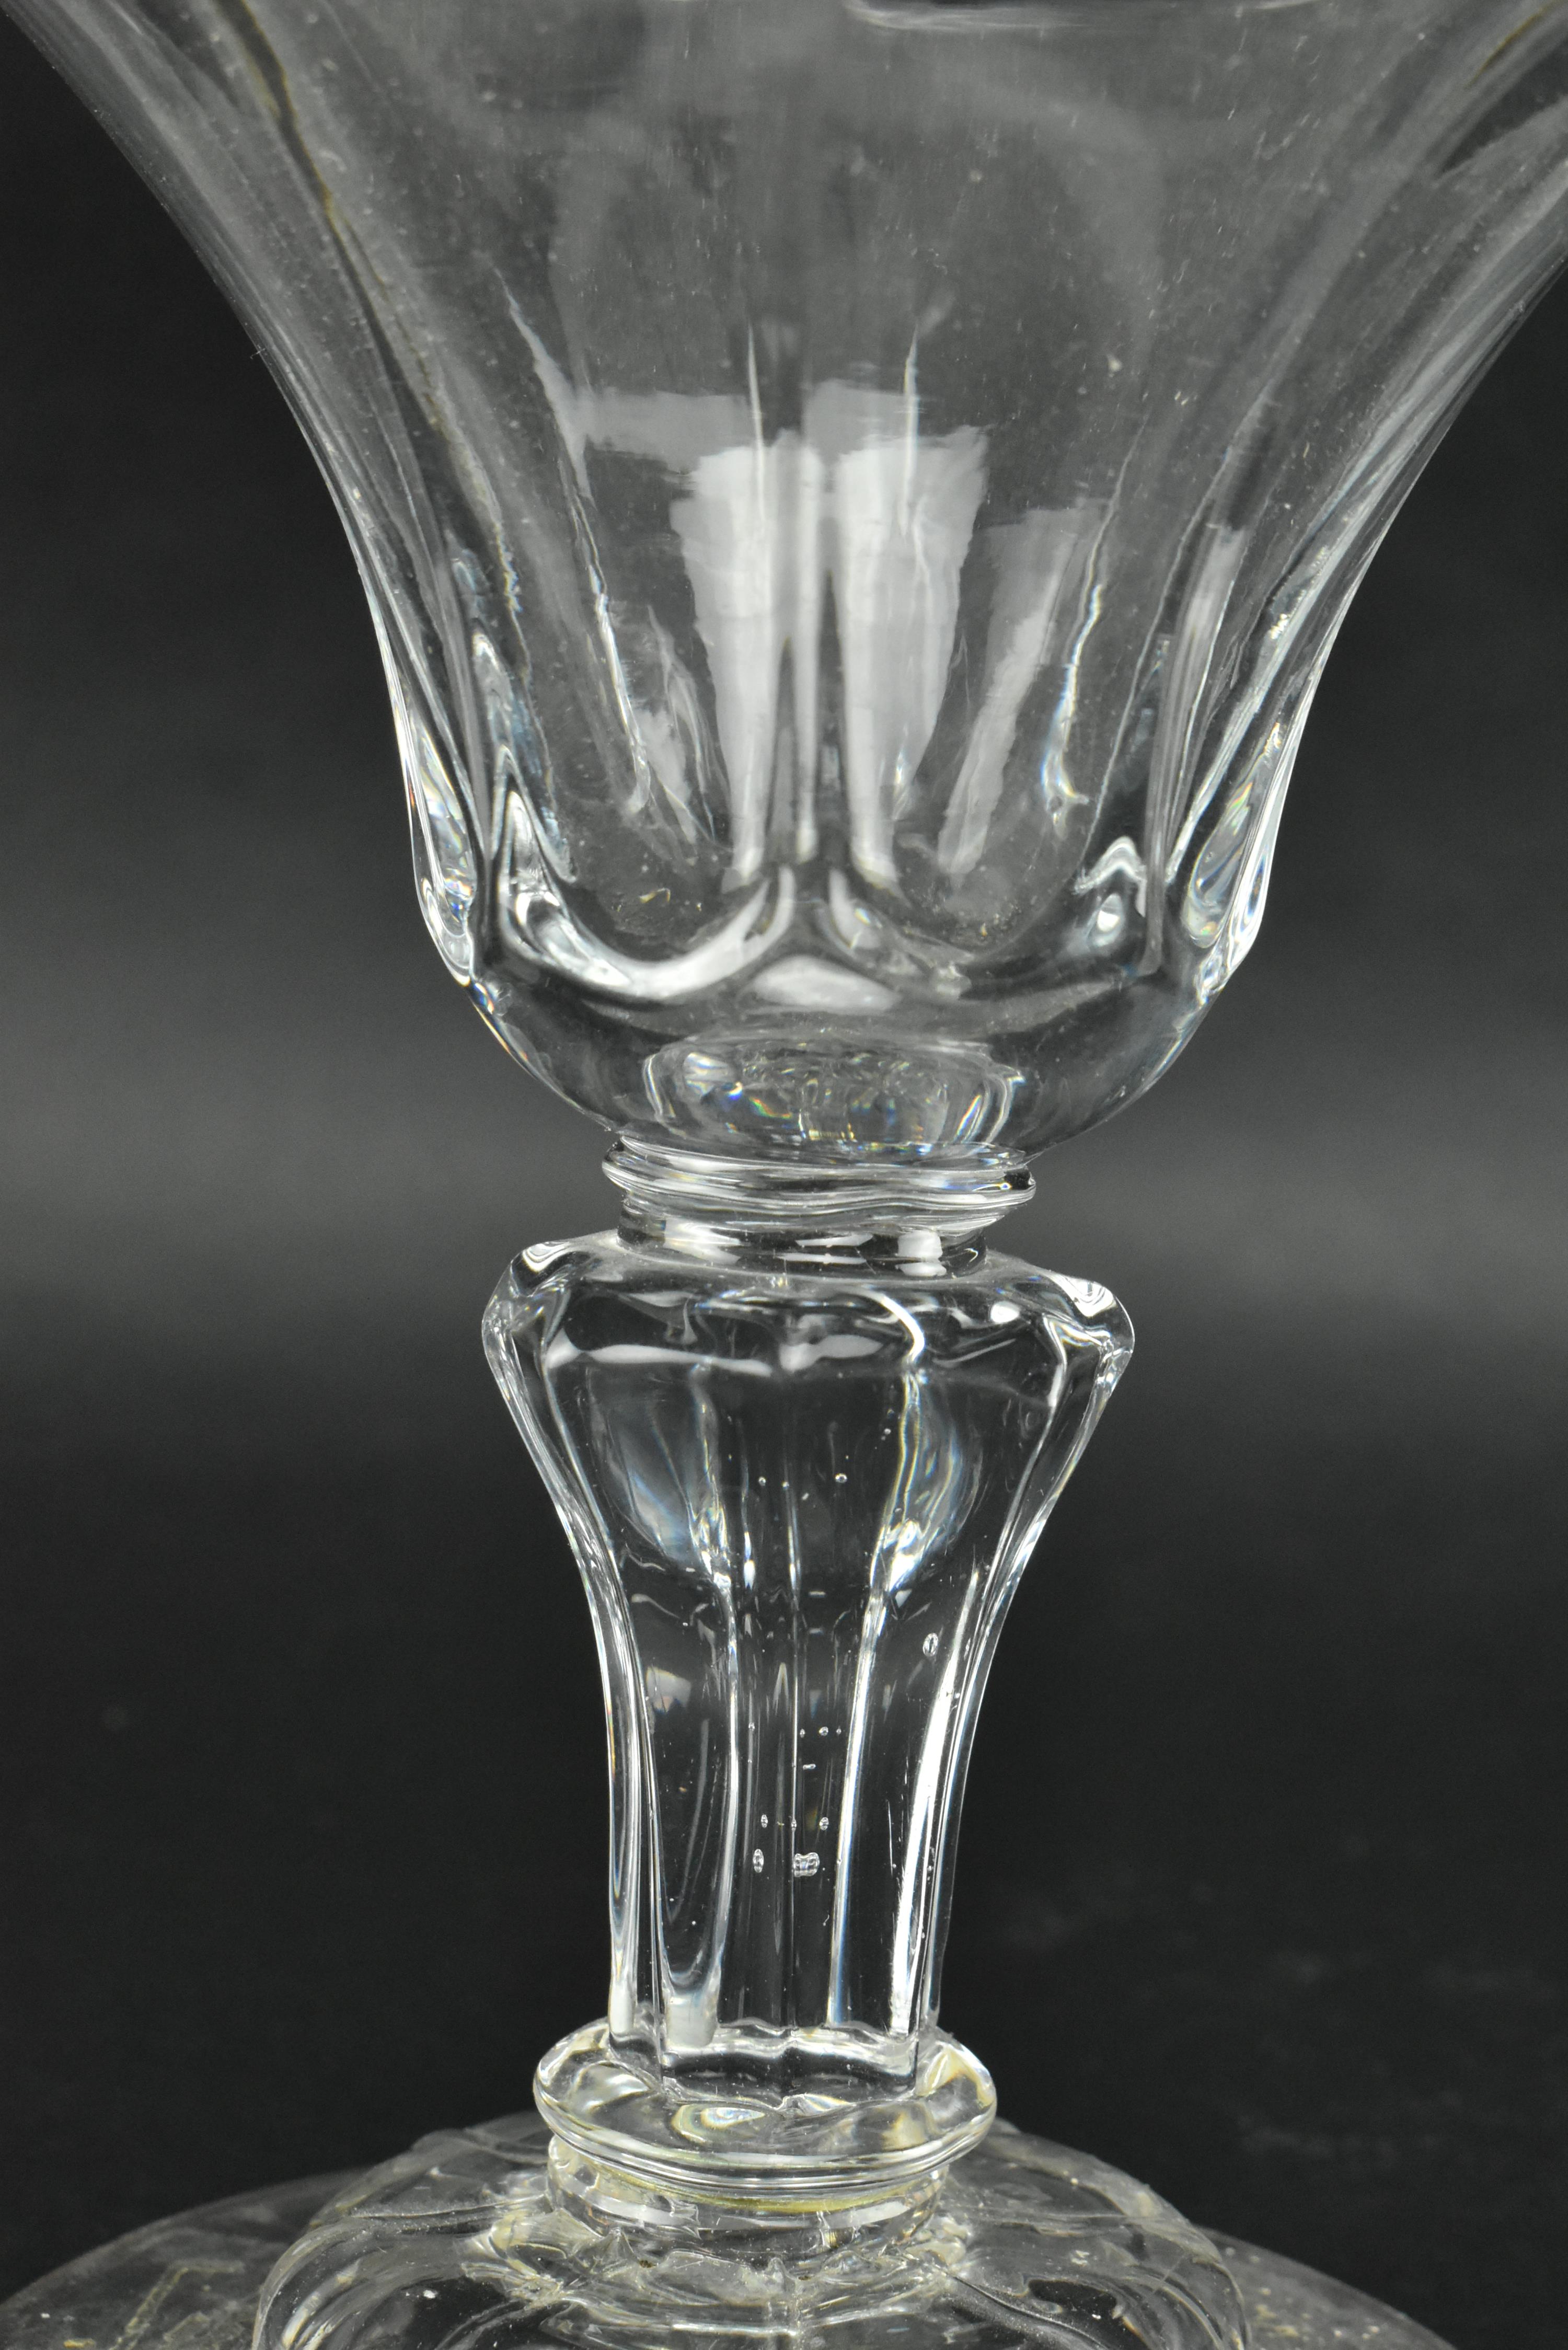 MID 18TH CENTURY MOULDED GLASS SWEETMEAT - Image 6 of 7